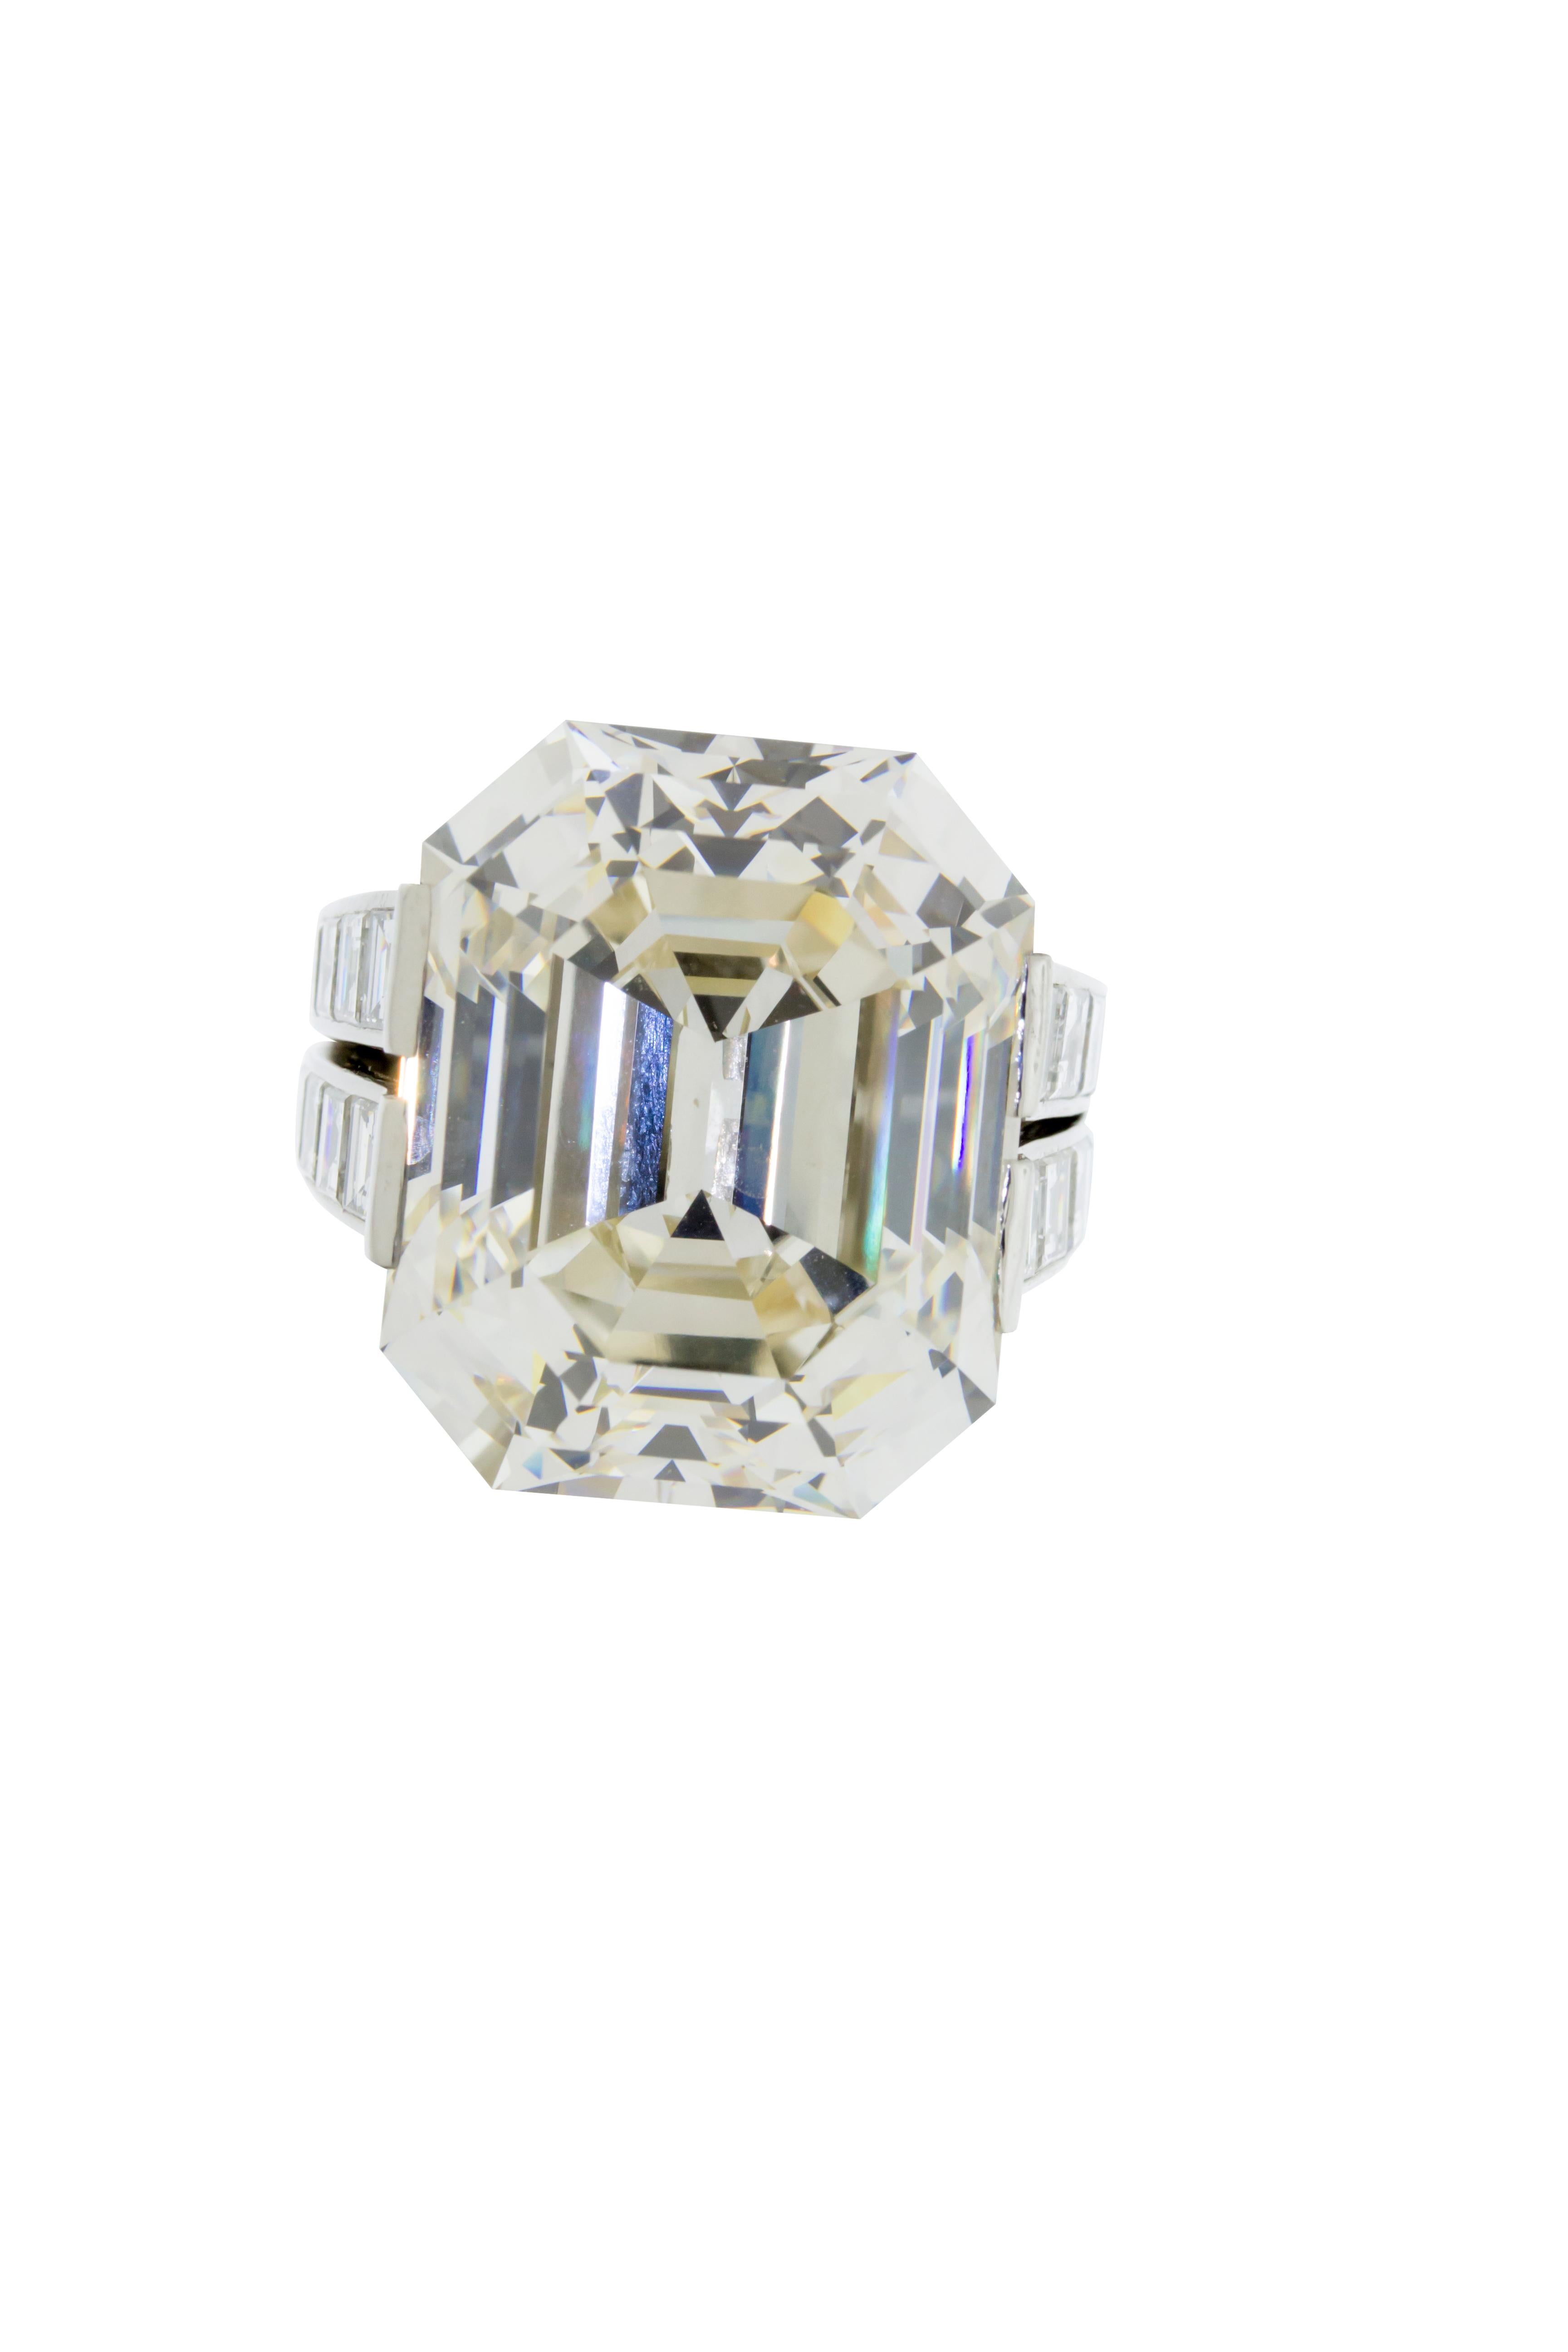 A 30.03 carat L Faint Brown VVS1 GIA certified emerald cut diamond set in an 18 grams of platinum signed by Cartier Monture. The setting features 28 baguette cut diamonds weighing 4.10 carats, and 65 round brilliant stones weighing 1.70 carats. This